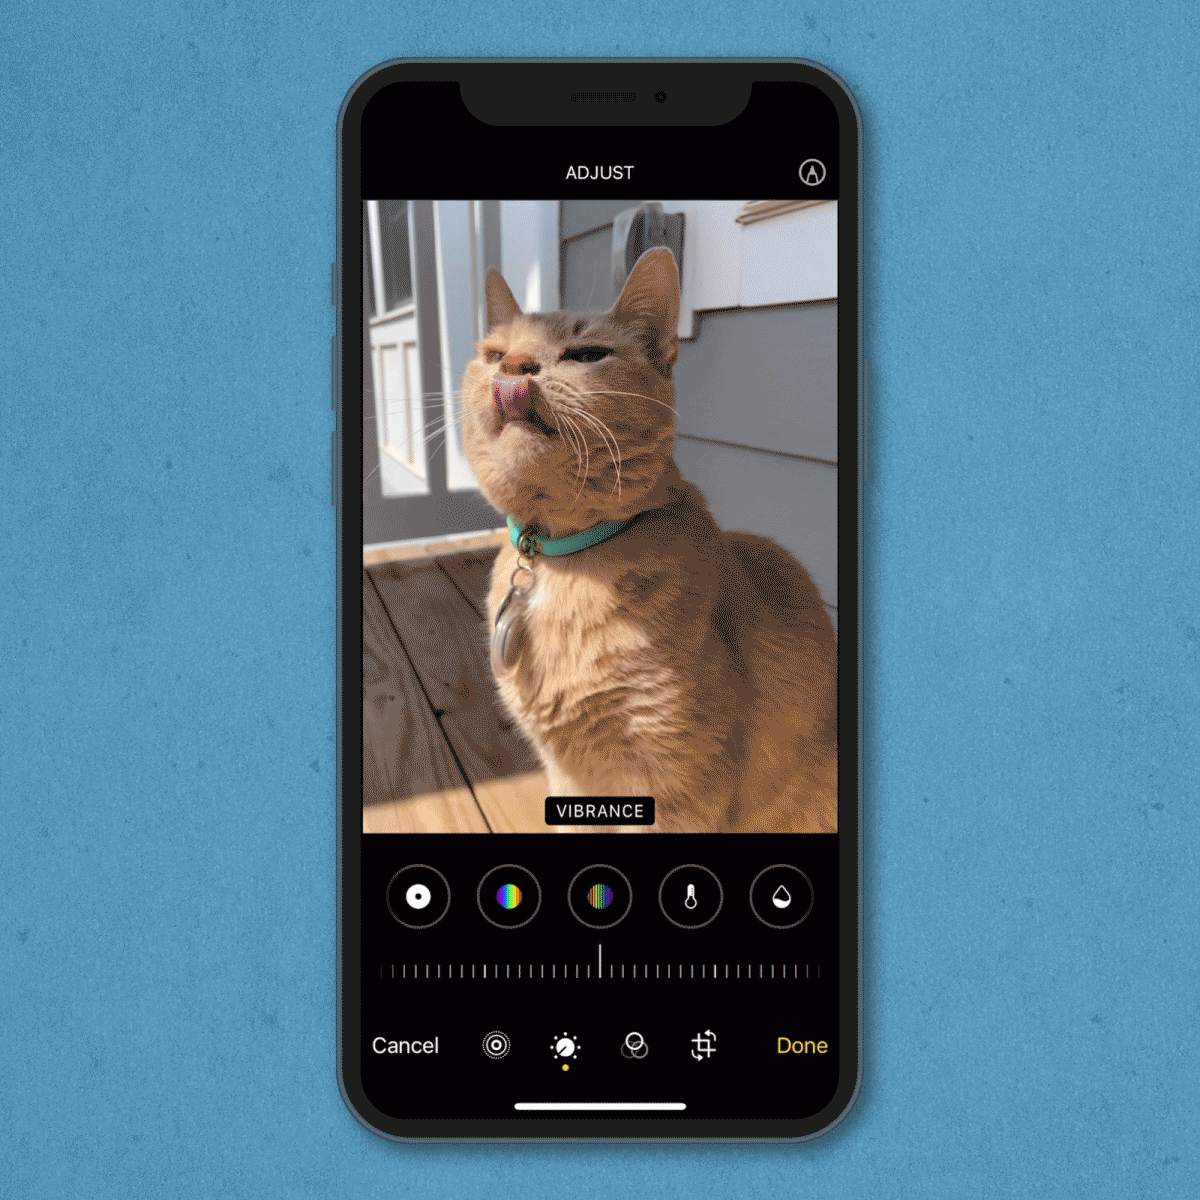 gif showing how to edit a photo's vibrance on an iPhone